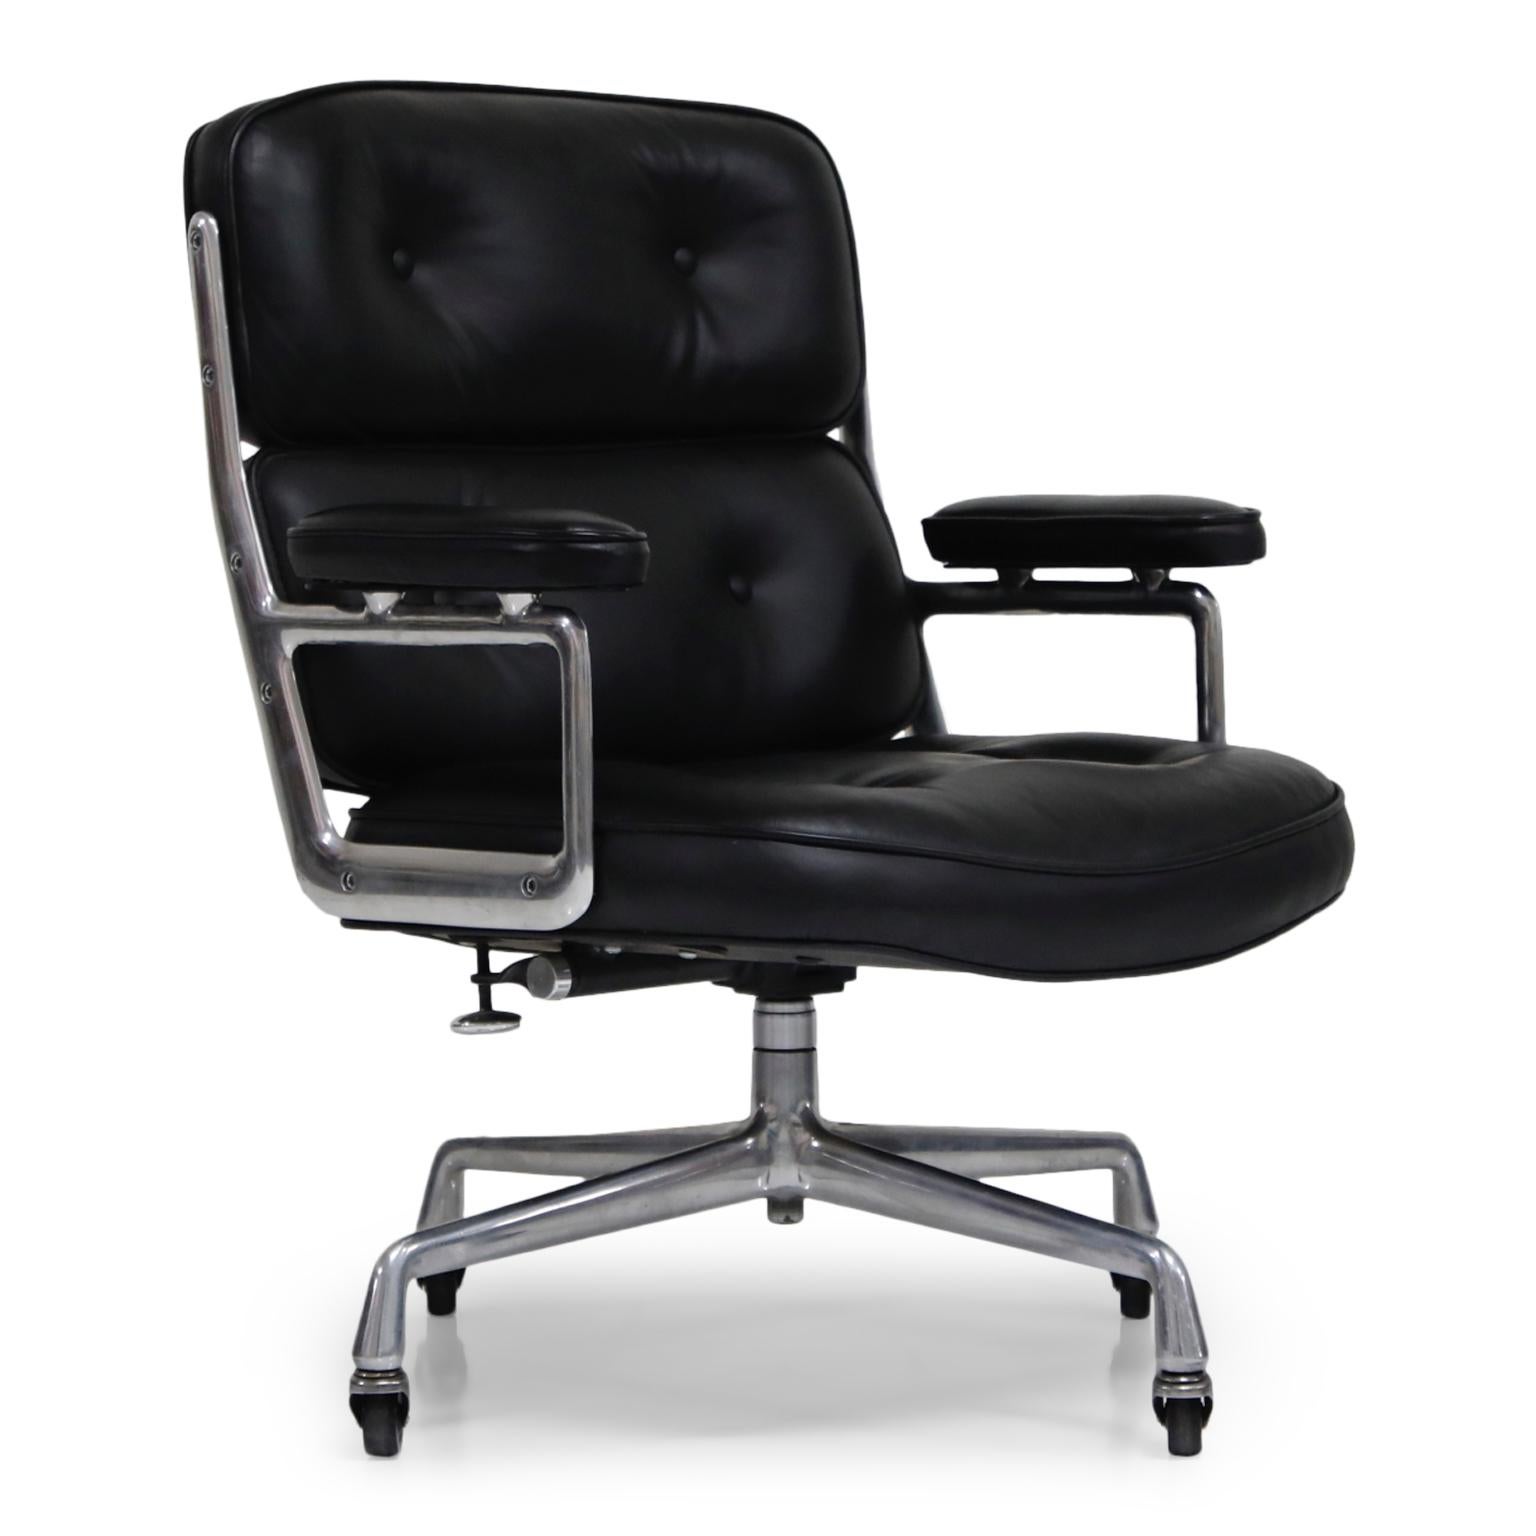 Mid-Century Modern Charles Eames for Herman Miller Leather Time Life Executive Chair, 1975, Signed